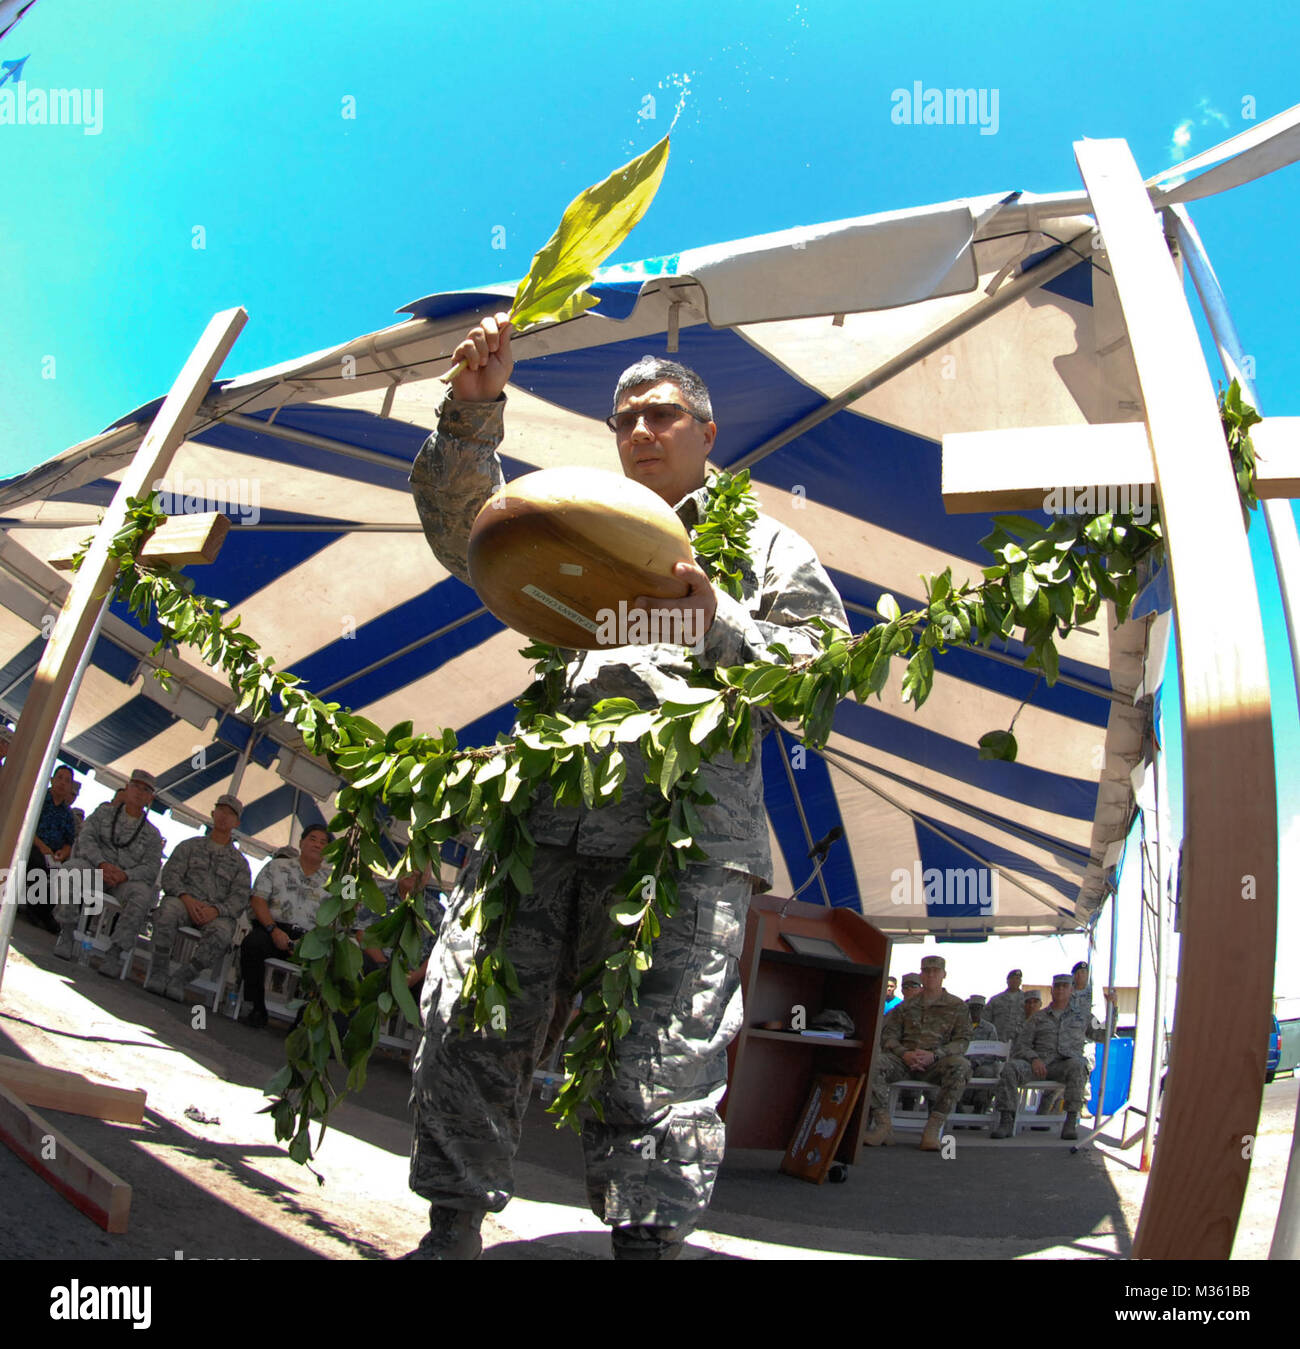 U.S. Air Force Chaplain Daniel Leatherman, 154 Wing Headquarters, performs a blessing at the 154 Security Forces Squadron (SFS) Indoor Firing Range on Joint Base Pearl Harbor-Hickam, Hawaii, Aug. 8, 2015. The Hawaiian tradition of unraveling of the maile lei, a native Hawaiian vine with shiny fragrant leaves, is similar to a typical ribbon cutting ceremony performed at the entrance of the new facility. (U.S. Air National Guard photo by Airman 1st Class Robert Cabuco) 150808-Z-UW413-028.JPG by Hawaii Air National Guard Stock Photo